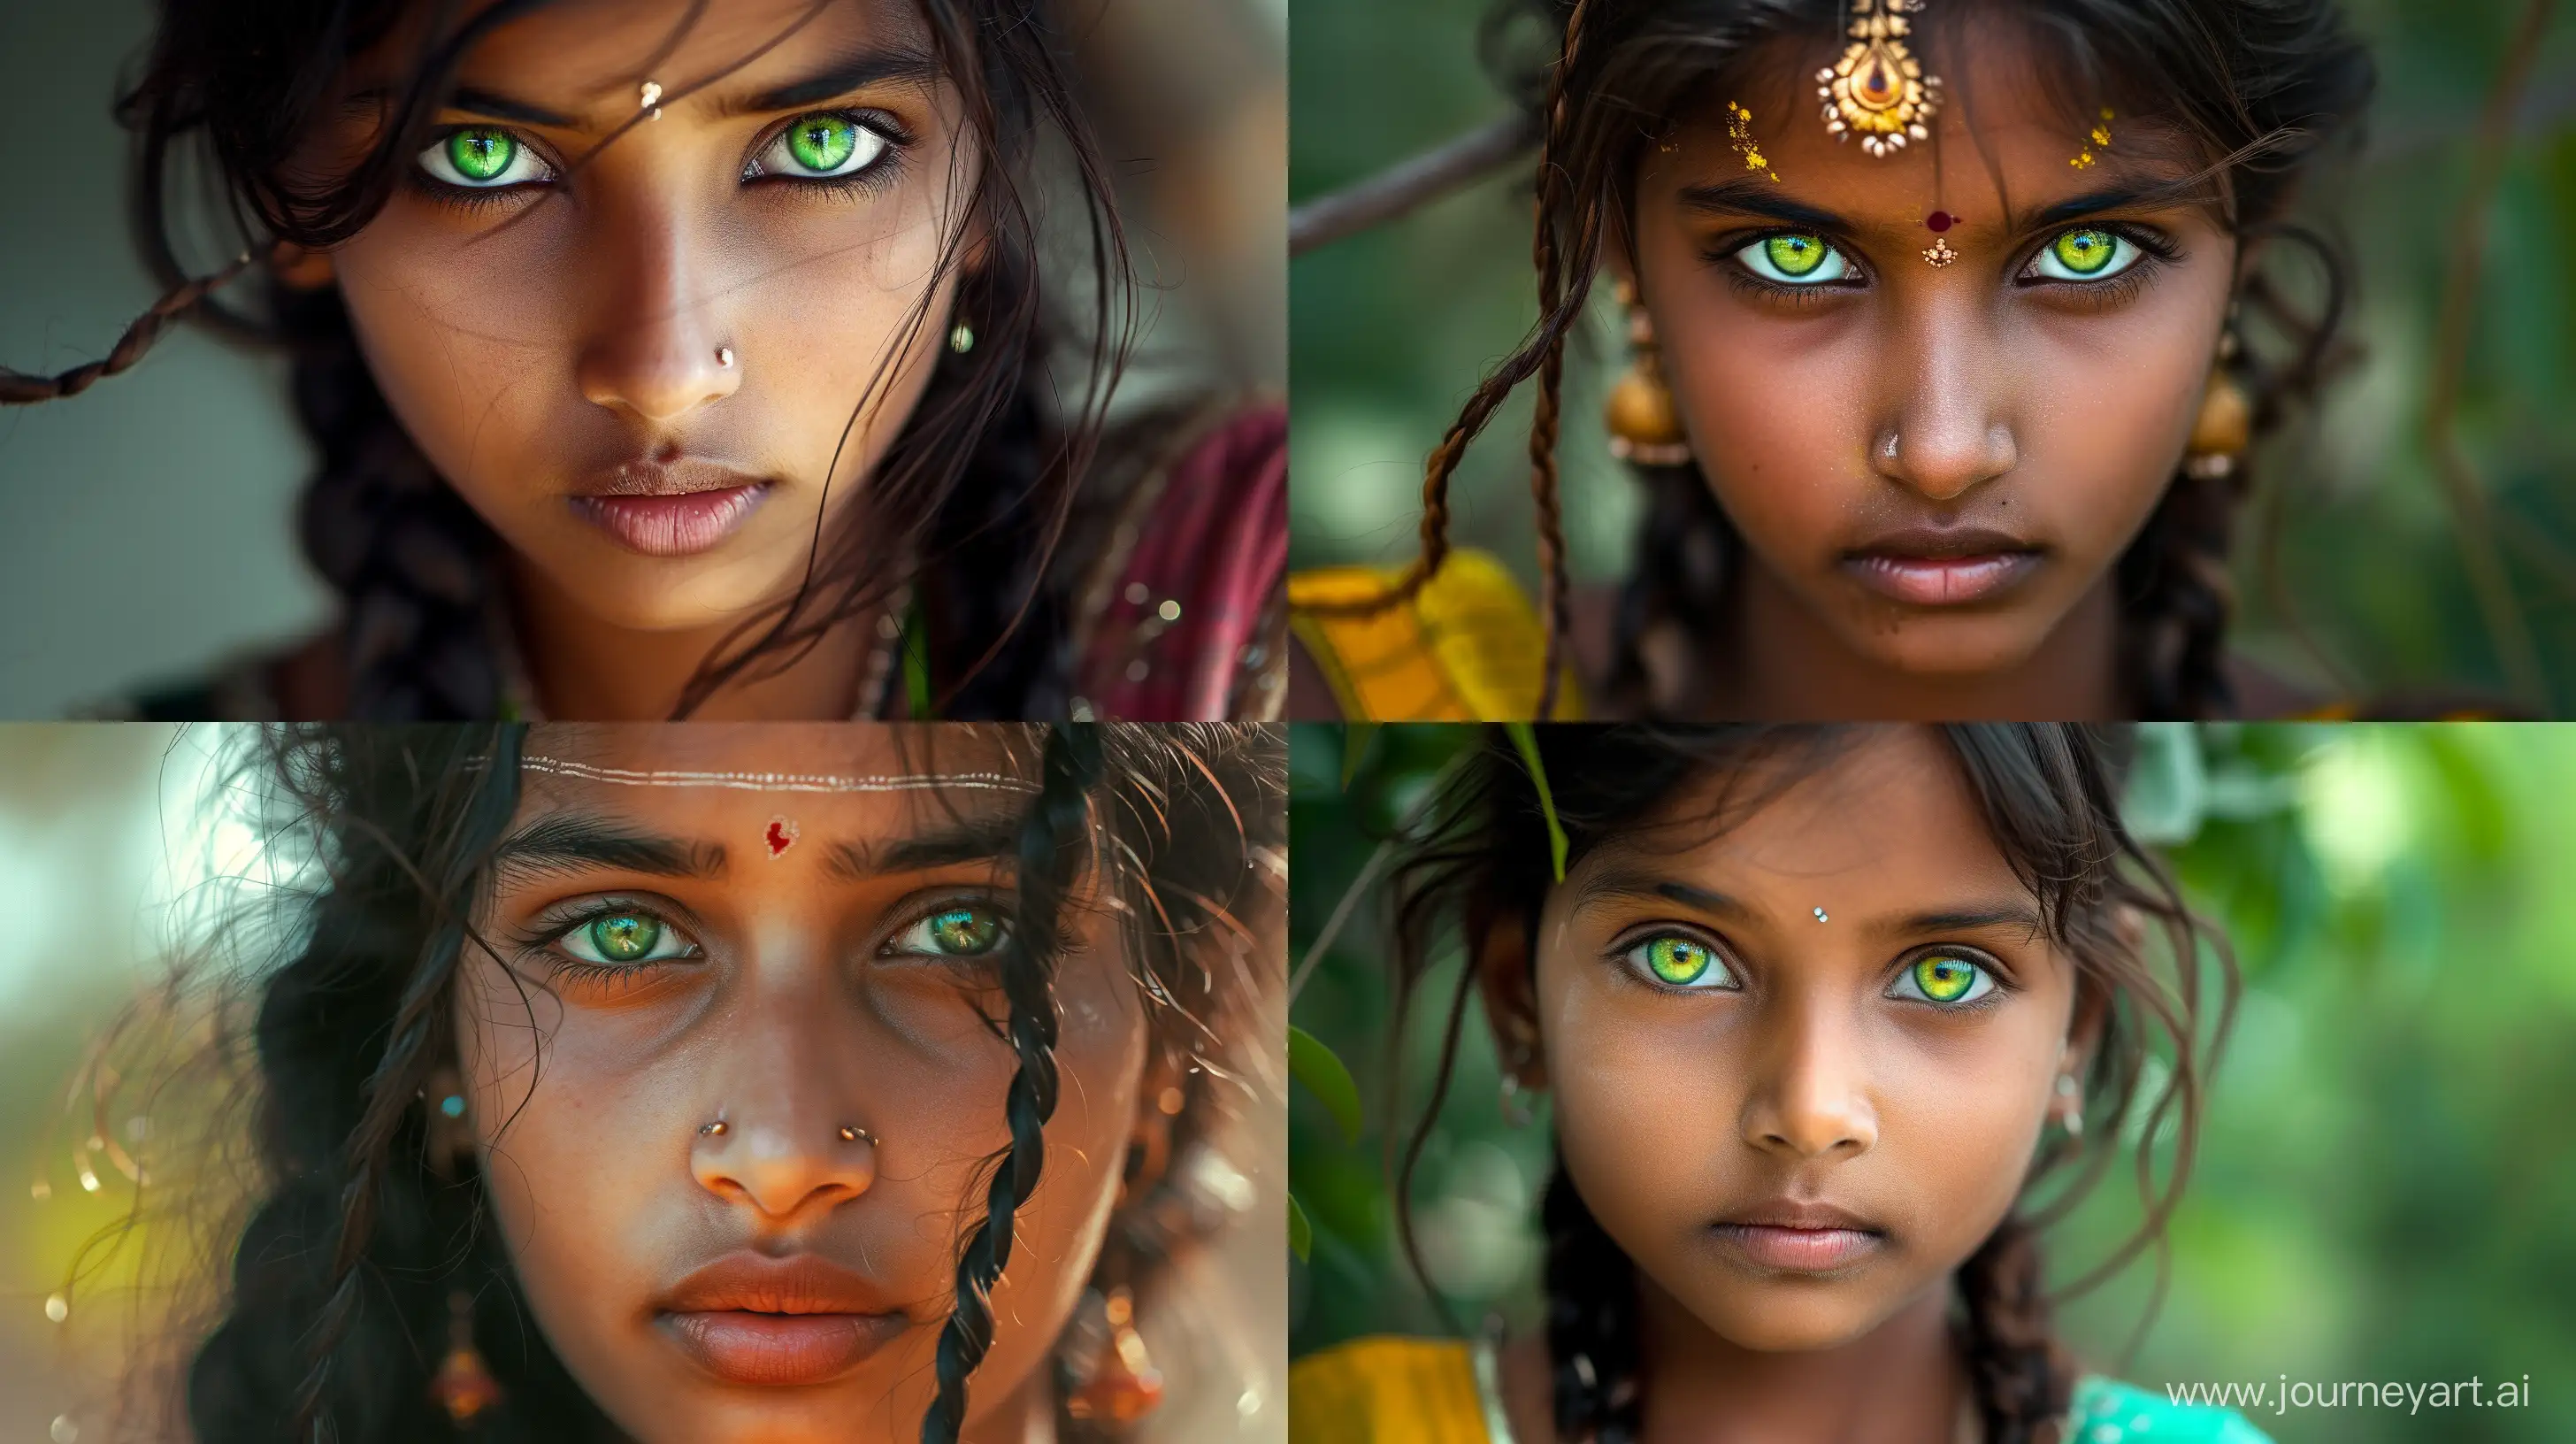 Captivating-Indian-Girl-with-Green-Eyes-and-Single-Braid